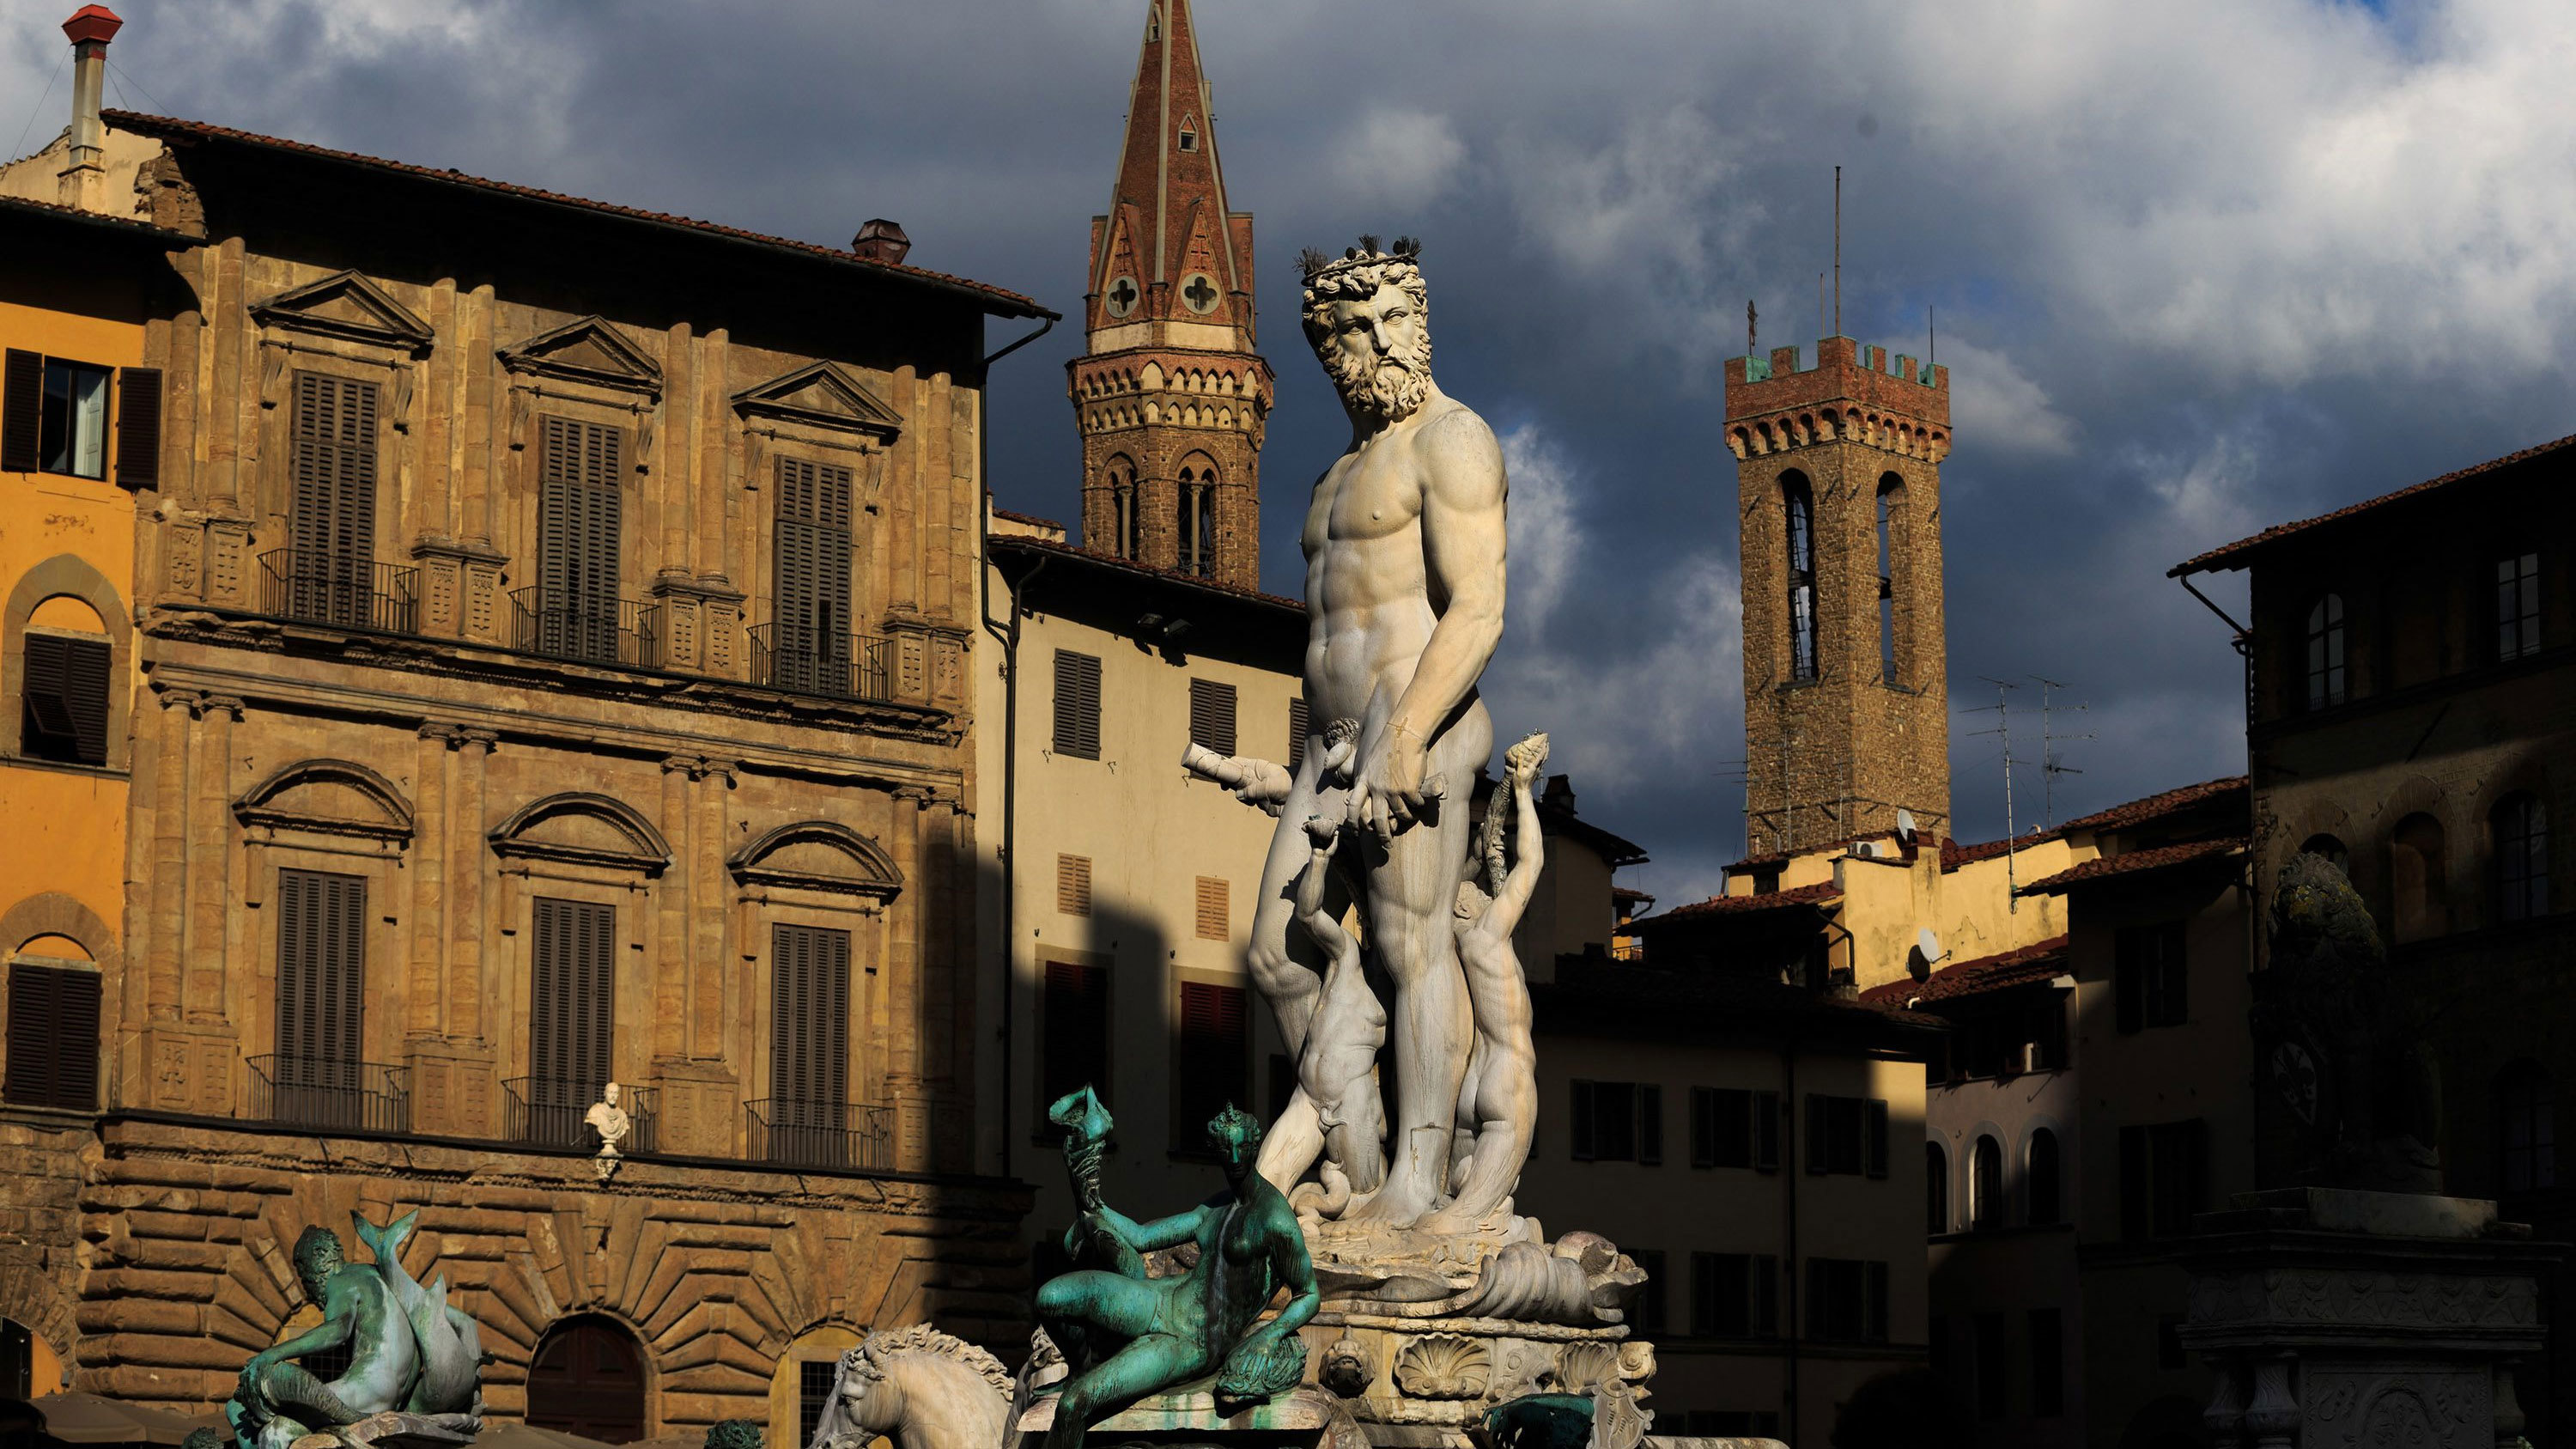 The Fountain of Neptune, pictured here in 2016, stands in the Piazza della Signoria in Florence, Italy.